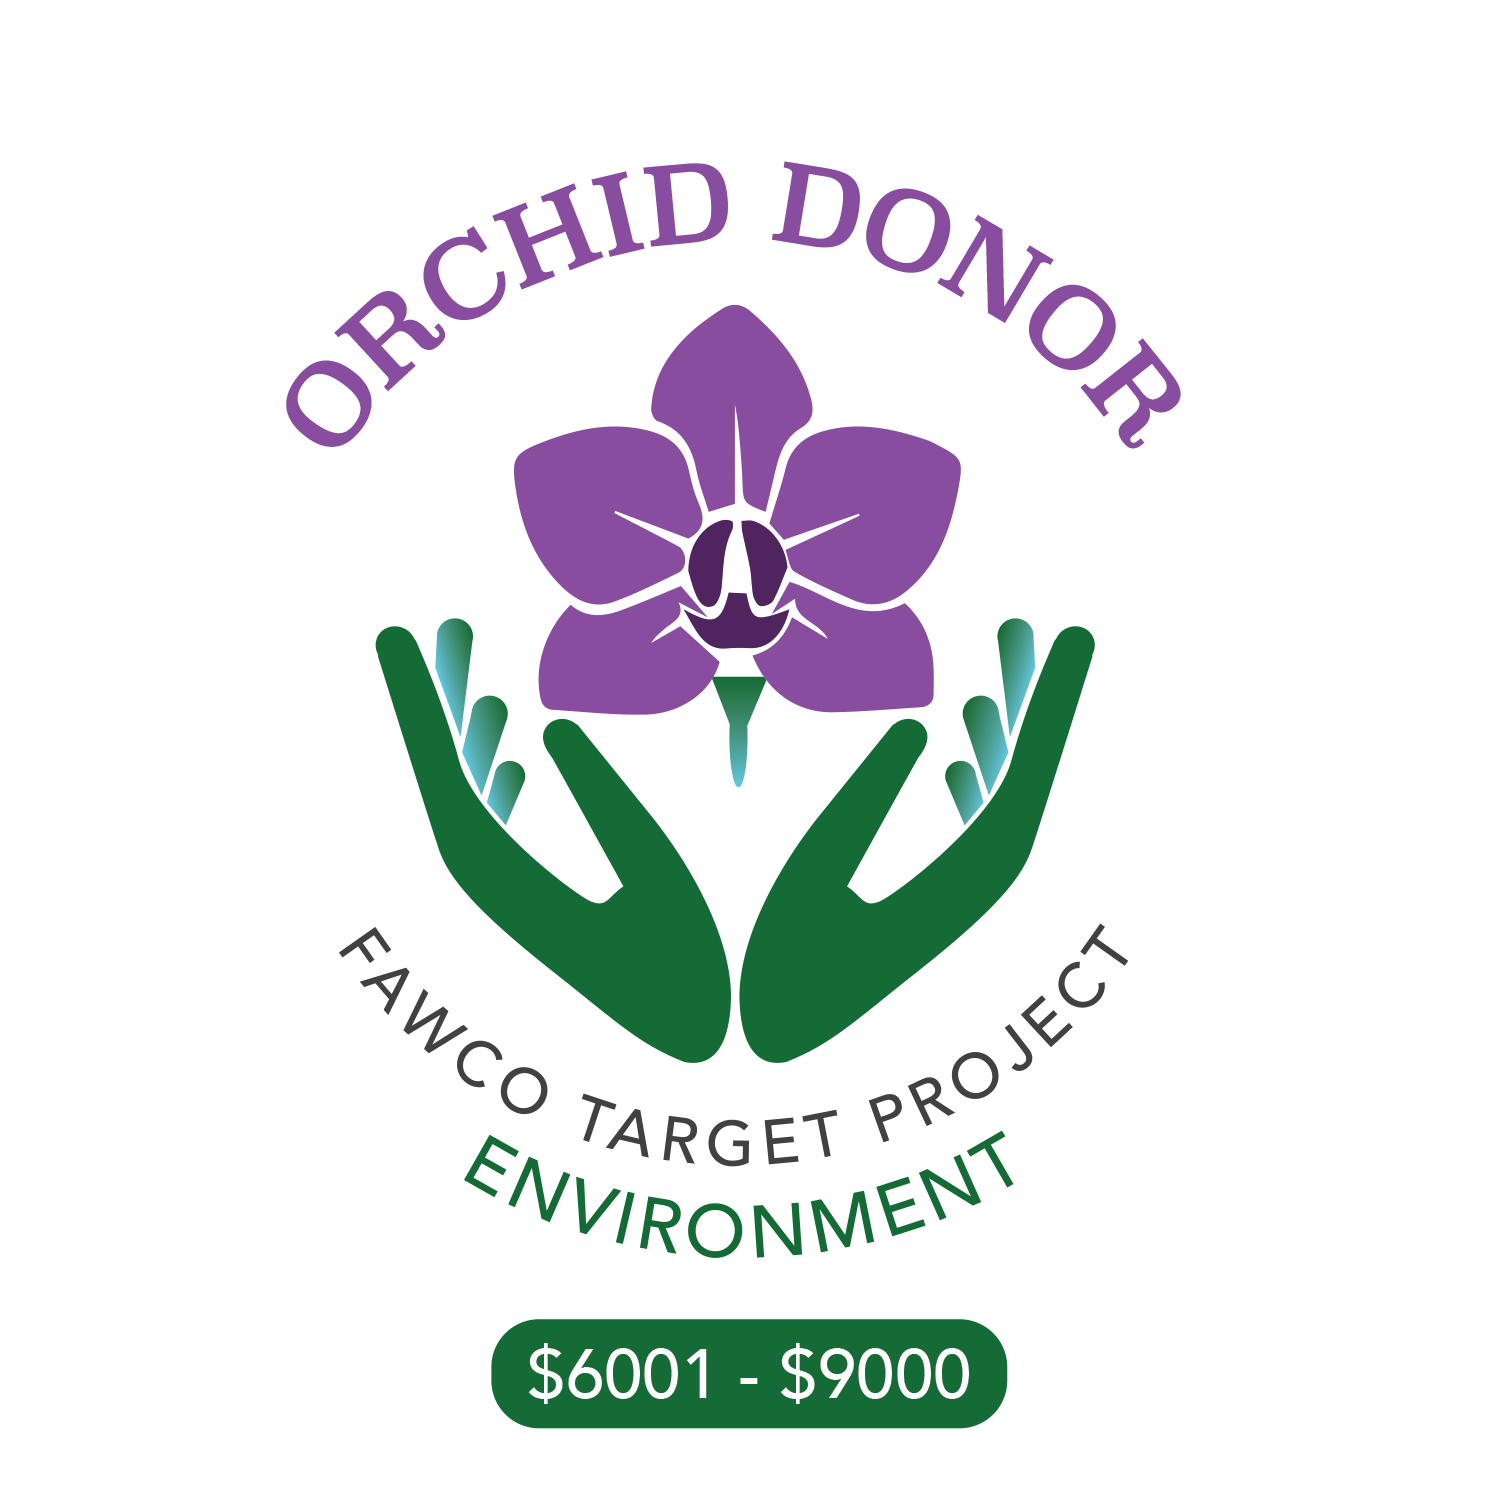 AWCH is an Orchid Donor!